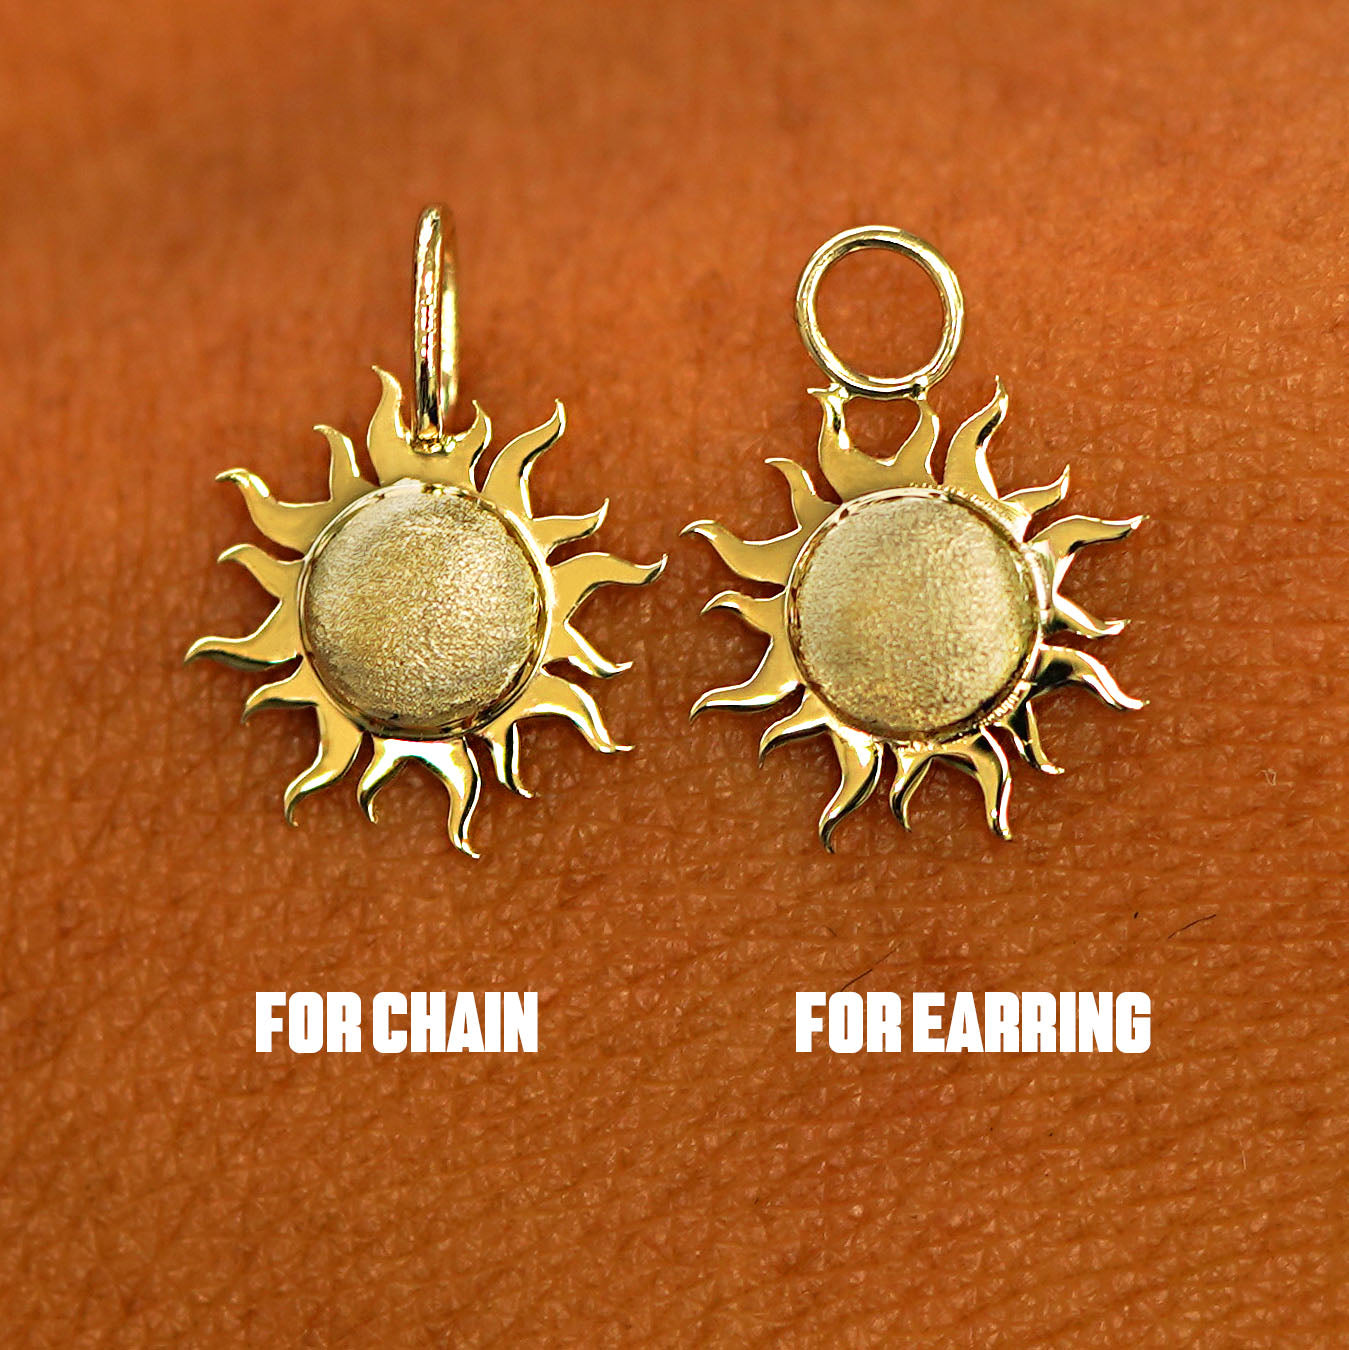 Two 14 karat solid gold Sun Charms shown in the For Chain and For Earring options